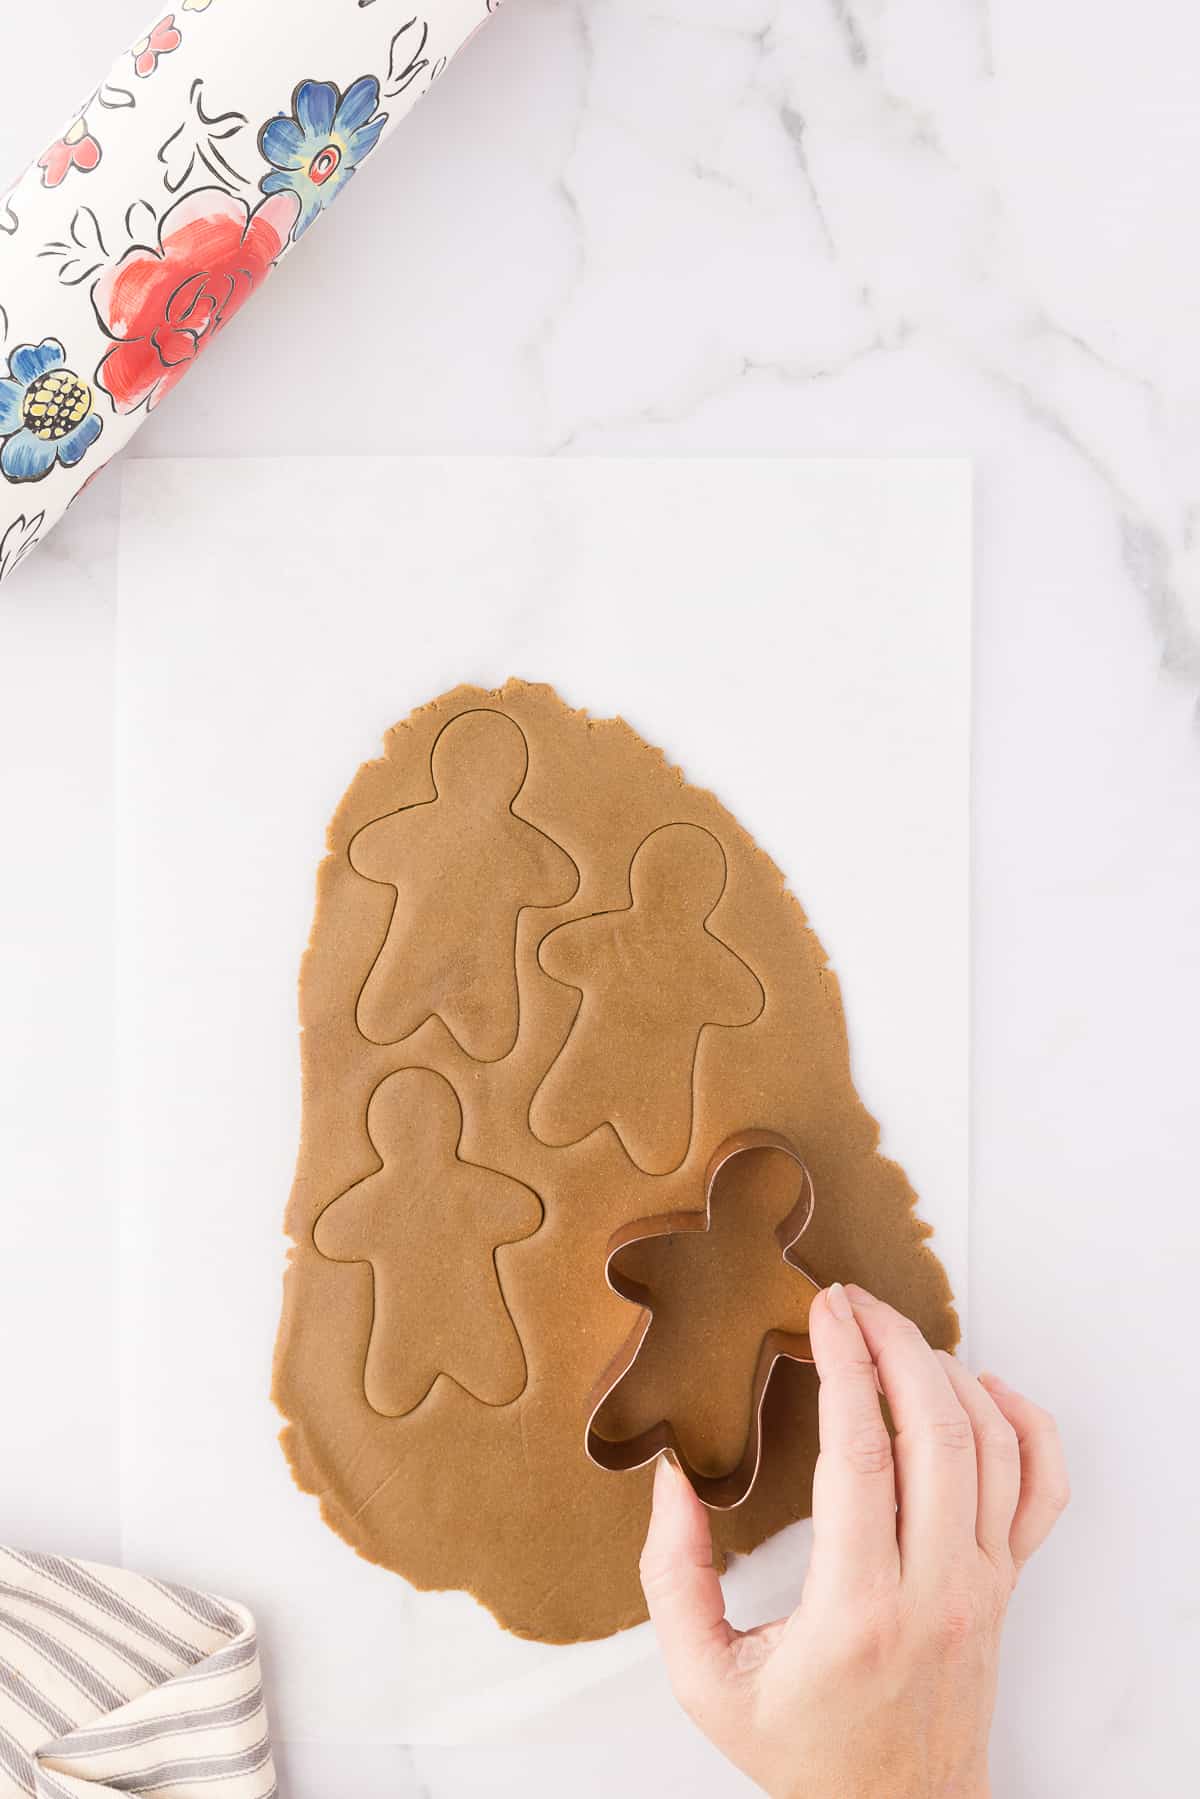 Cutting out gingerbread men with remaining dough on white background. 